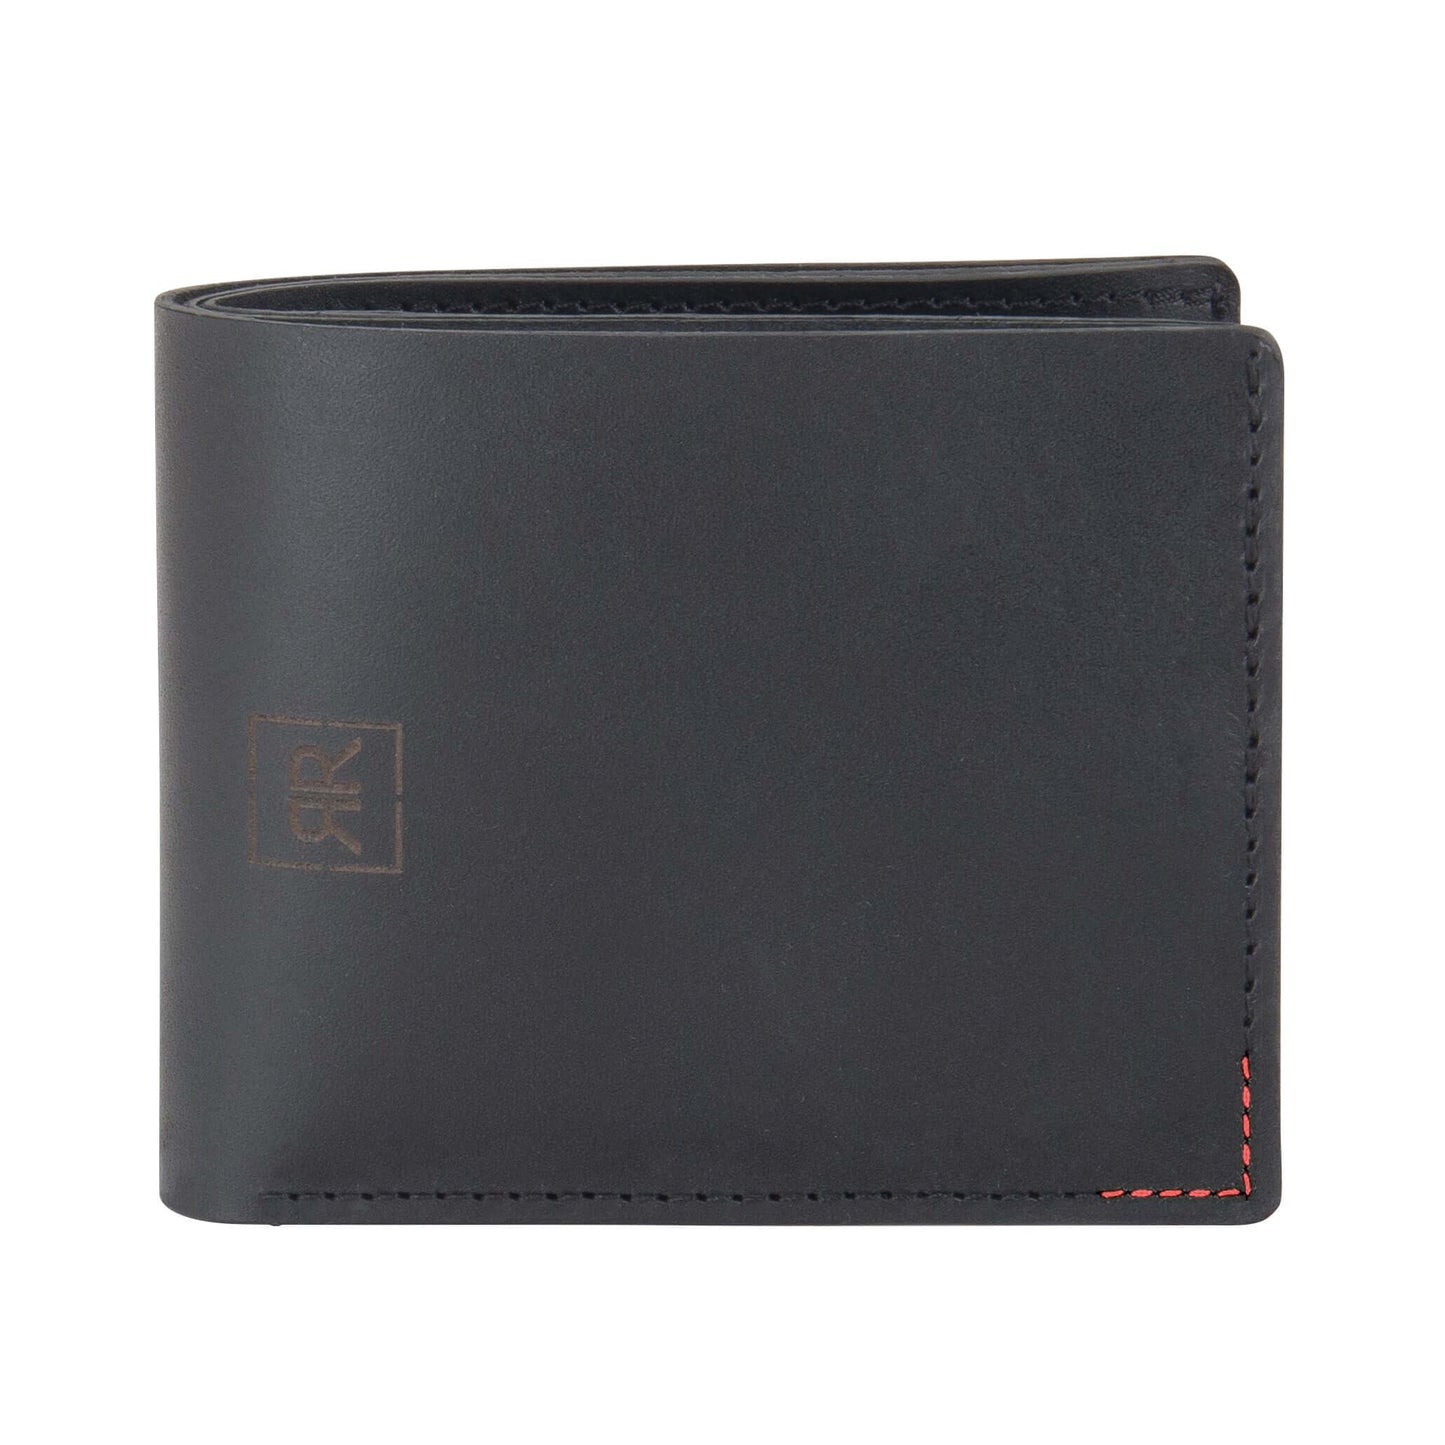 Billfold Wallet with Coin Pouch - Black